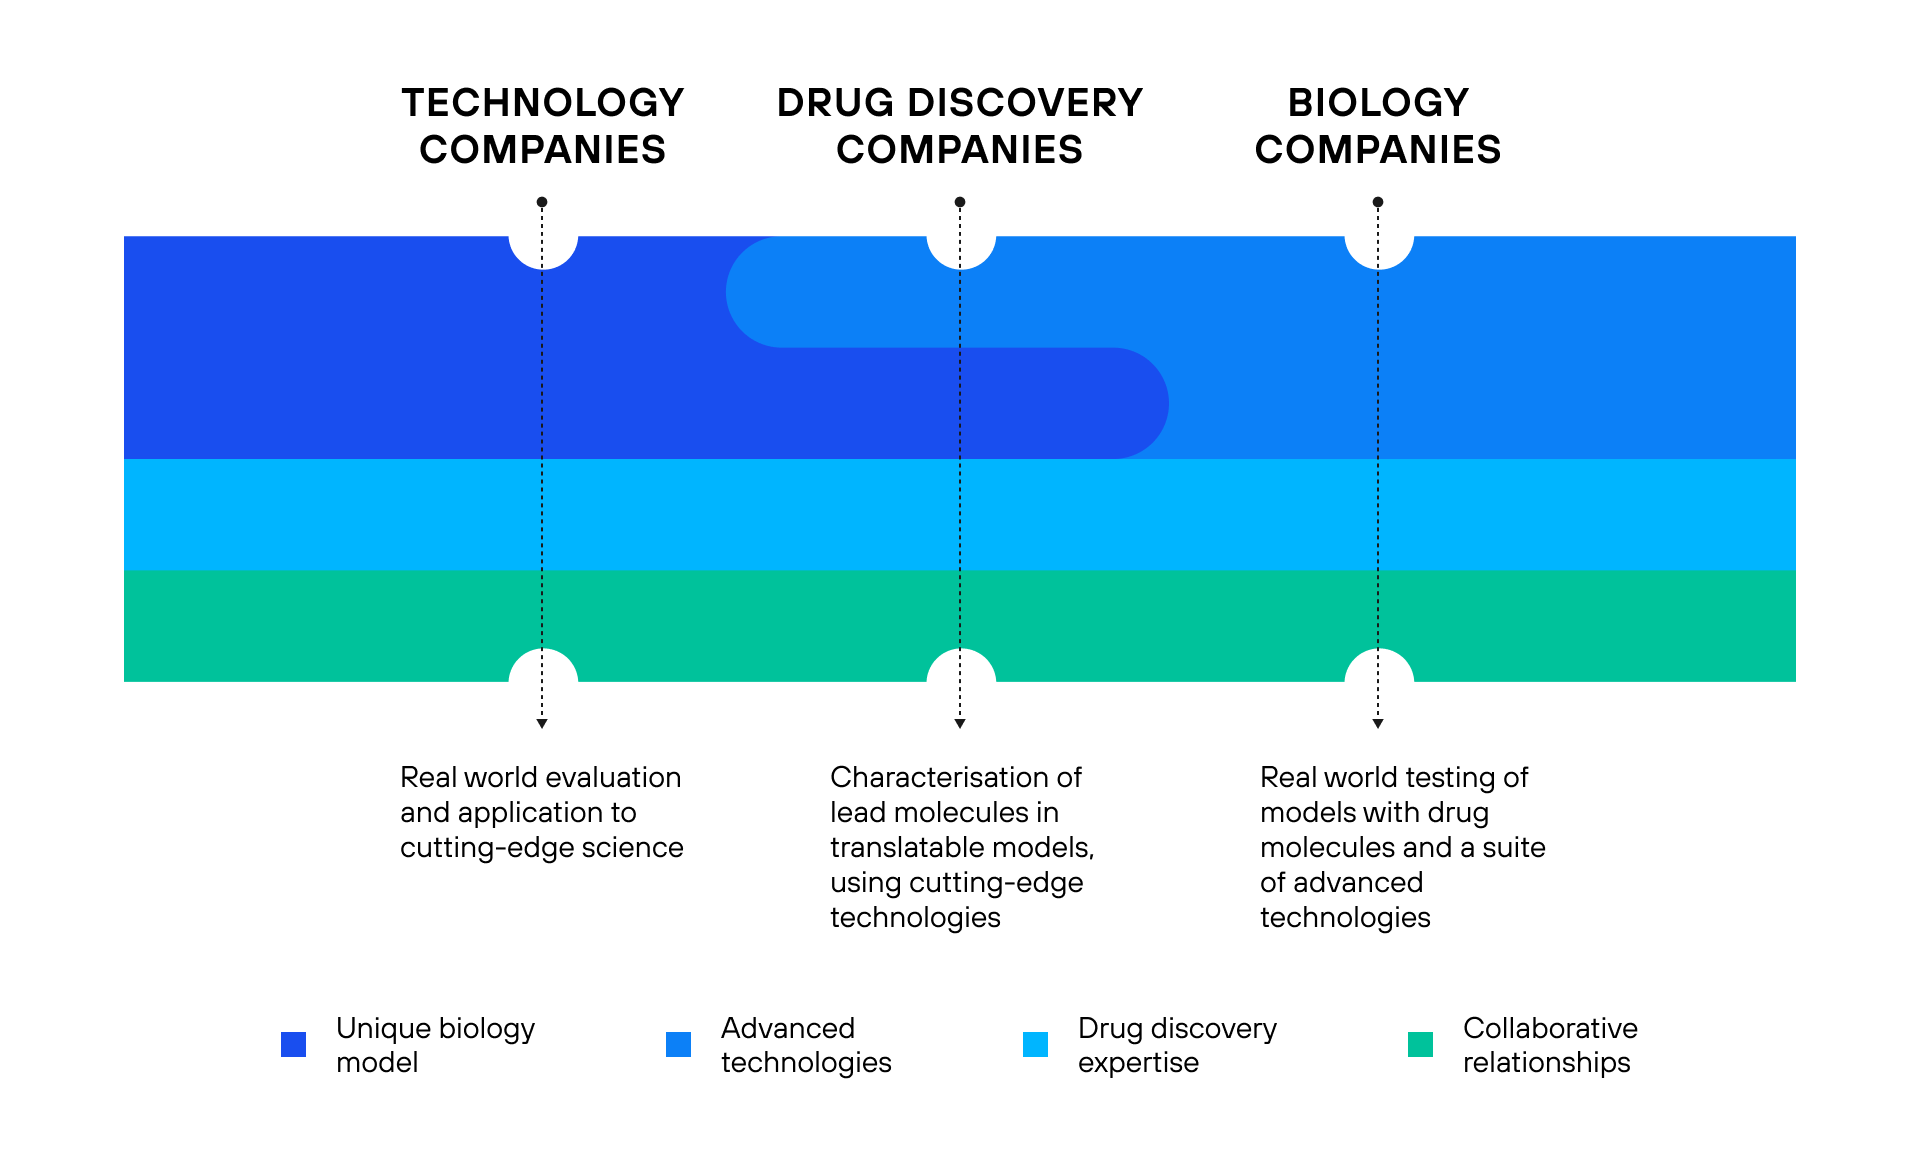 technology companies can accelerate drug discovery